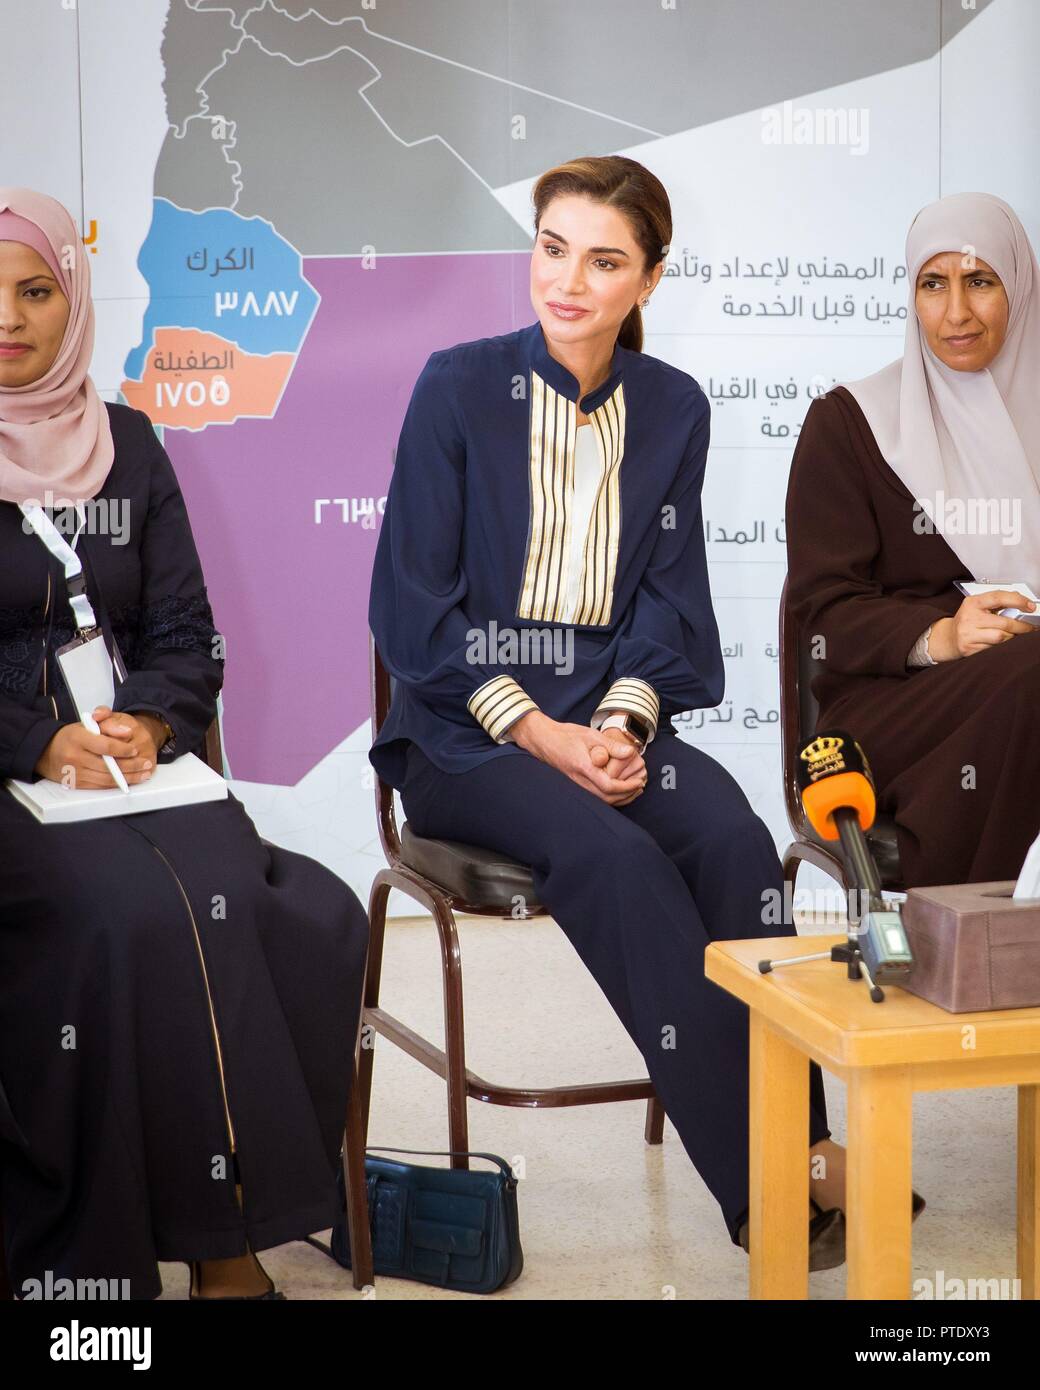 Queen Rania of Jordan at the Queen Rania Teacher Academy in Al Karak, on October 08, 2018, to meet teachers who are taking part in the Teach Like a Champion 2.0 program Photo: Albert Ph vd Werf/ Netherlands OUT/Point de Vue OUT | Stock Photo